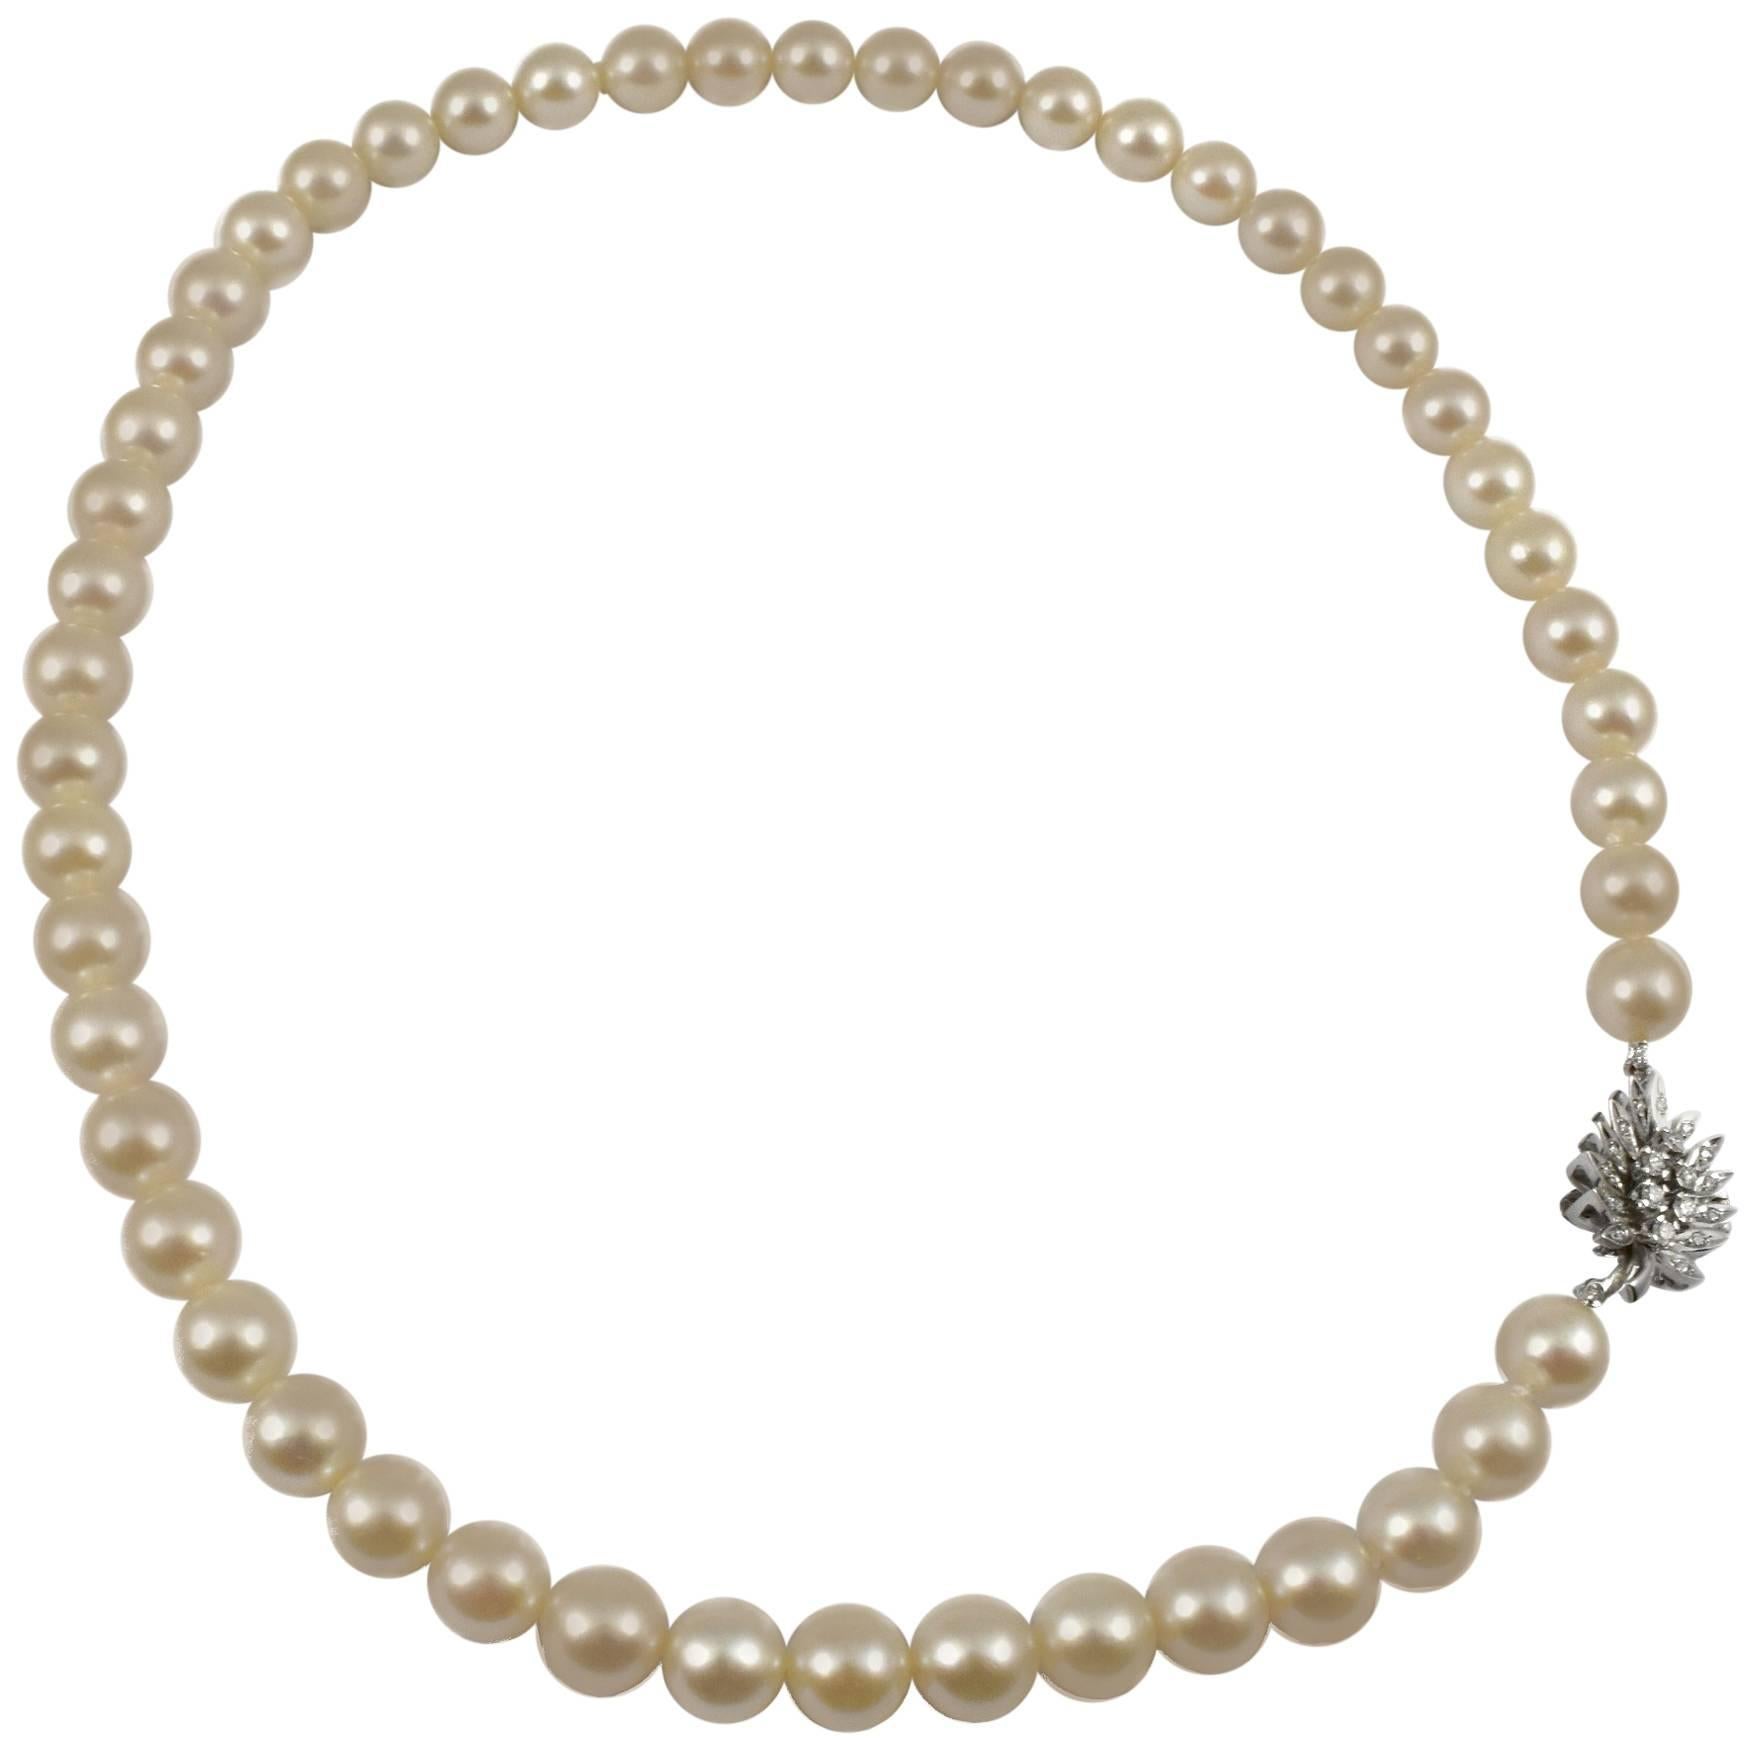 A Pearl necklace with a handmade Diamond White Gold Leaf design clasp. The solid 18 karat gold clasp is handmade in detail with a safety catch and set with diamonds. The pearls are single strand 9mm saltwater white with Ivory overtone, Princess